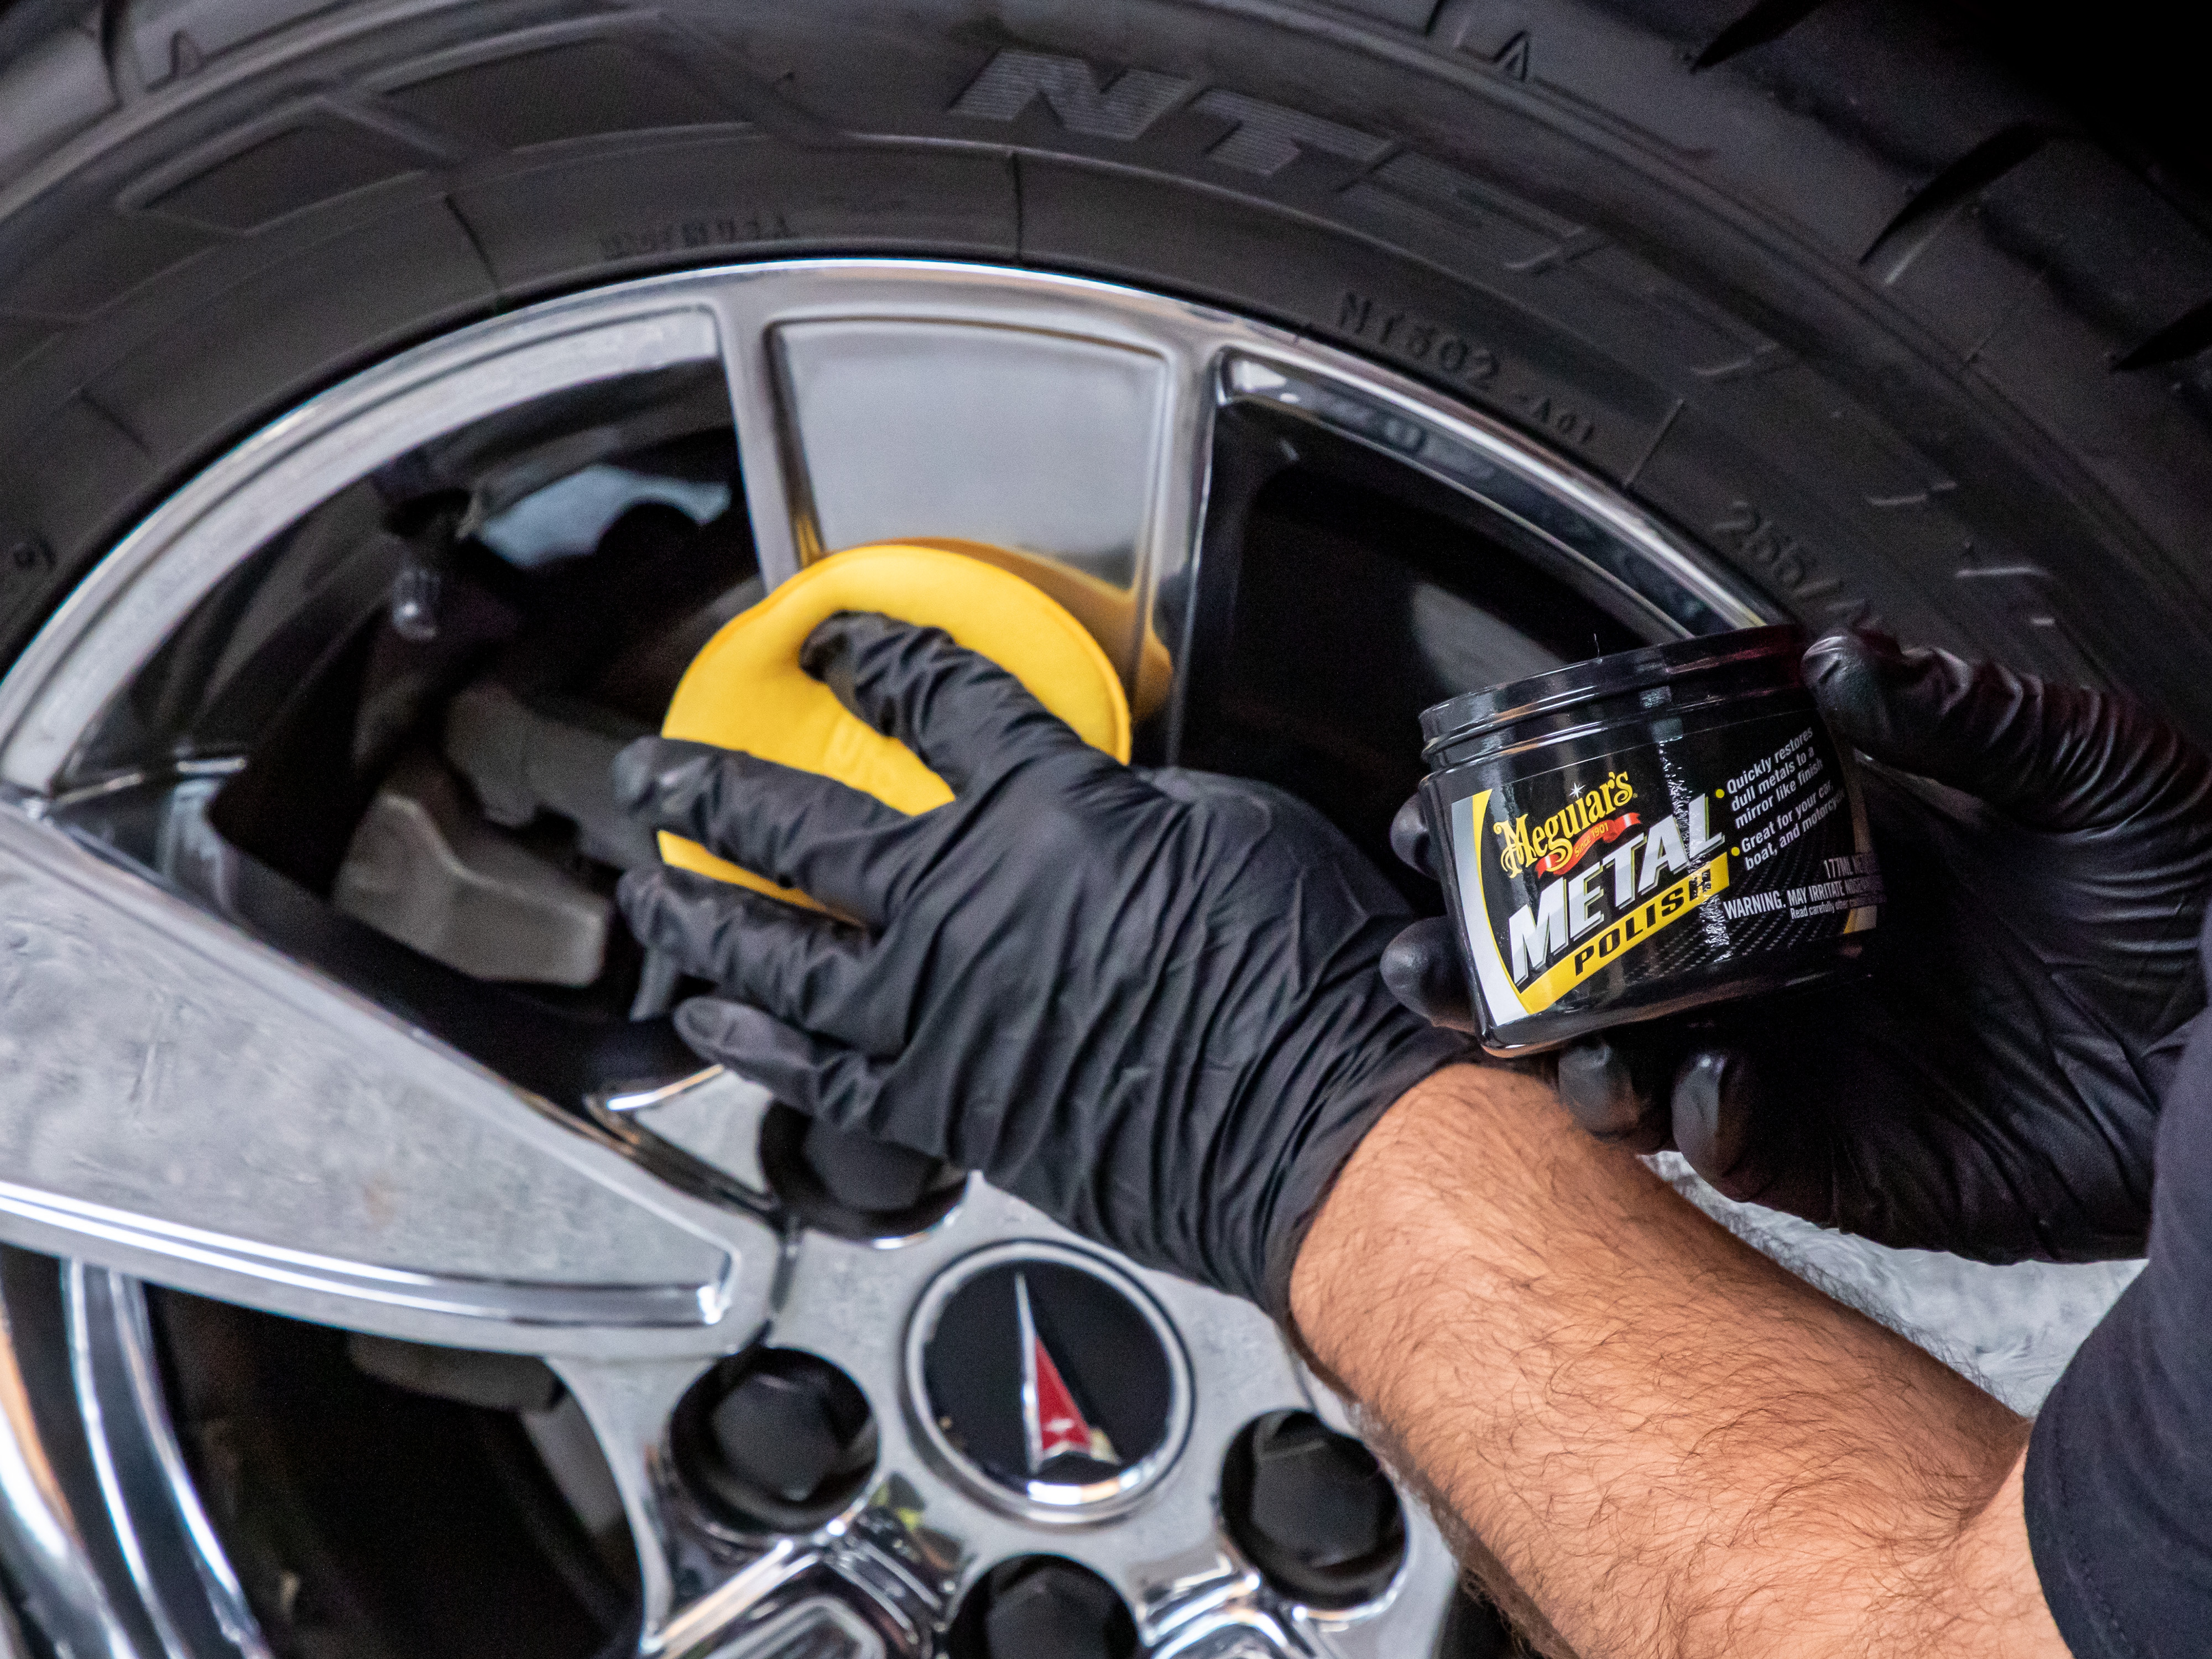 How To Polish Chrome & Other Metals On Your Car